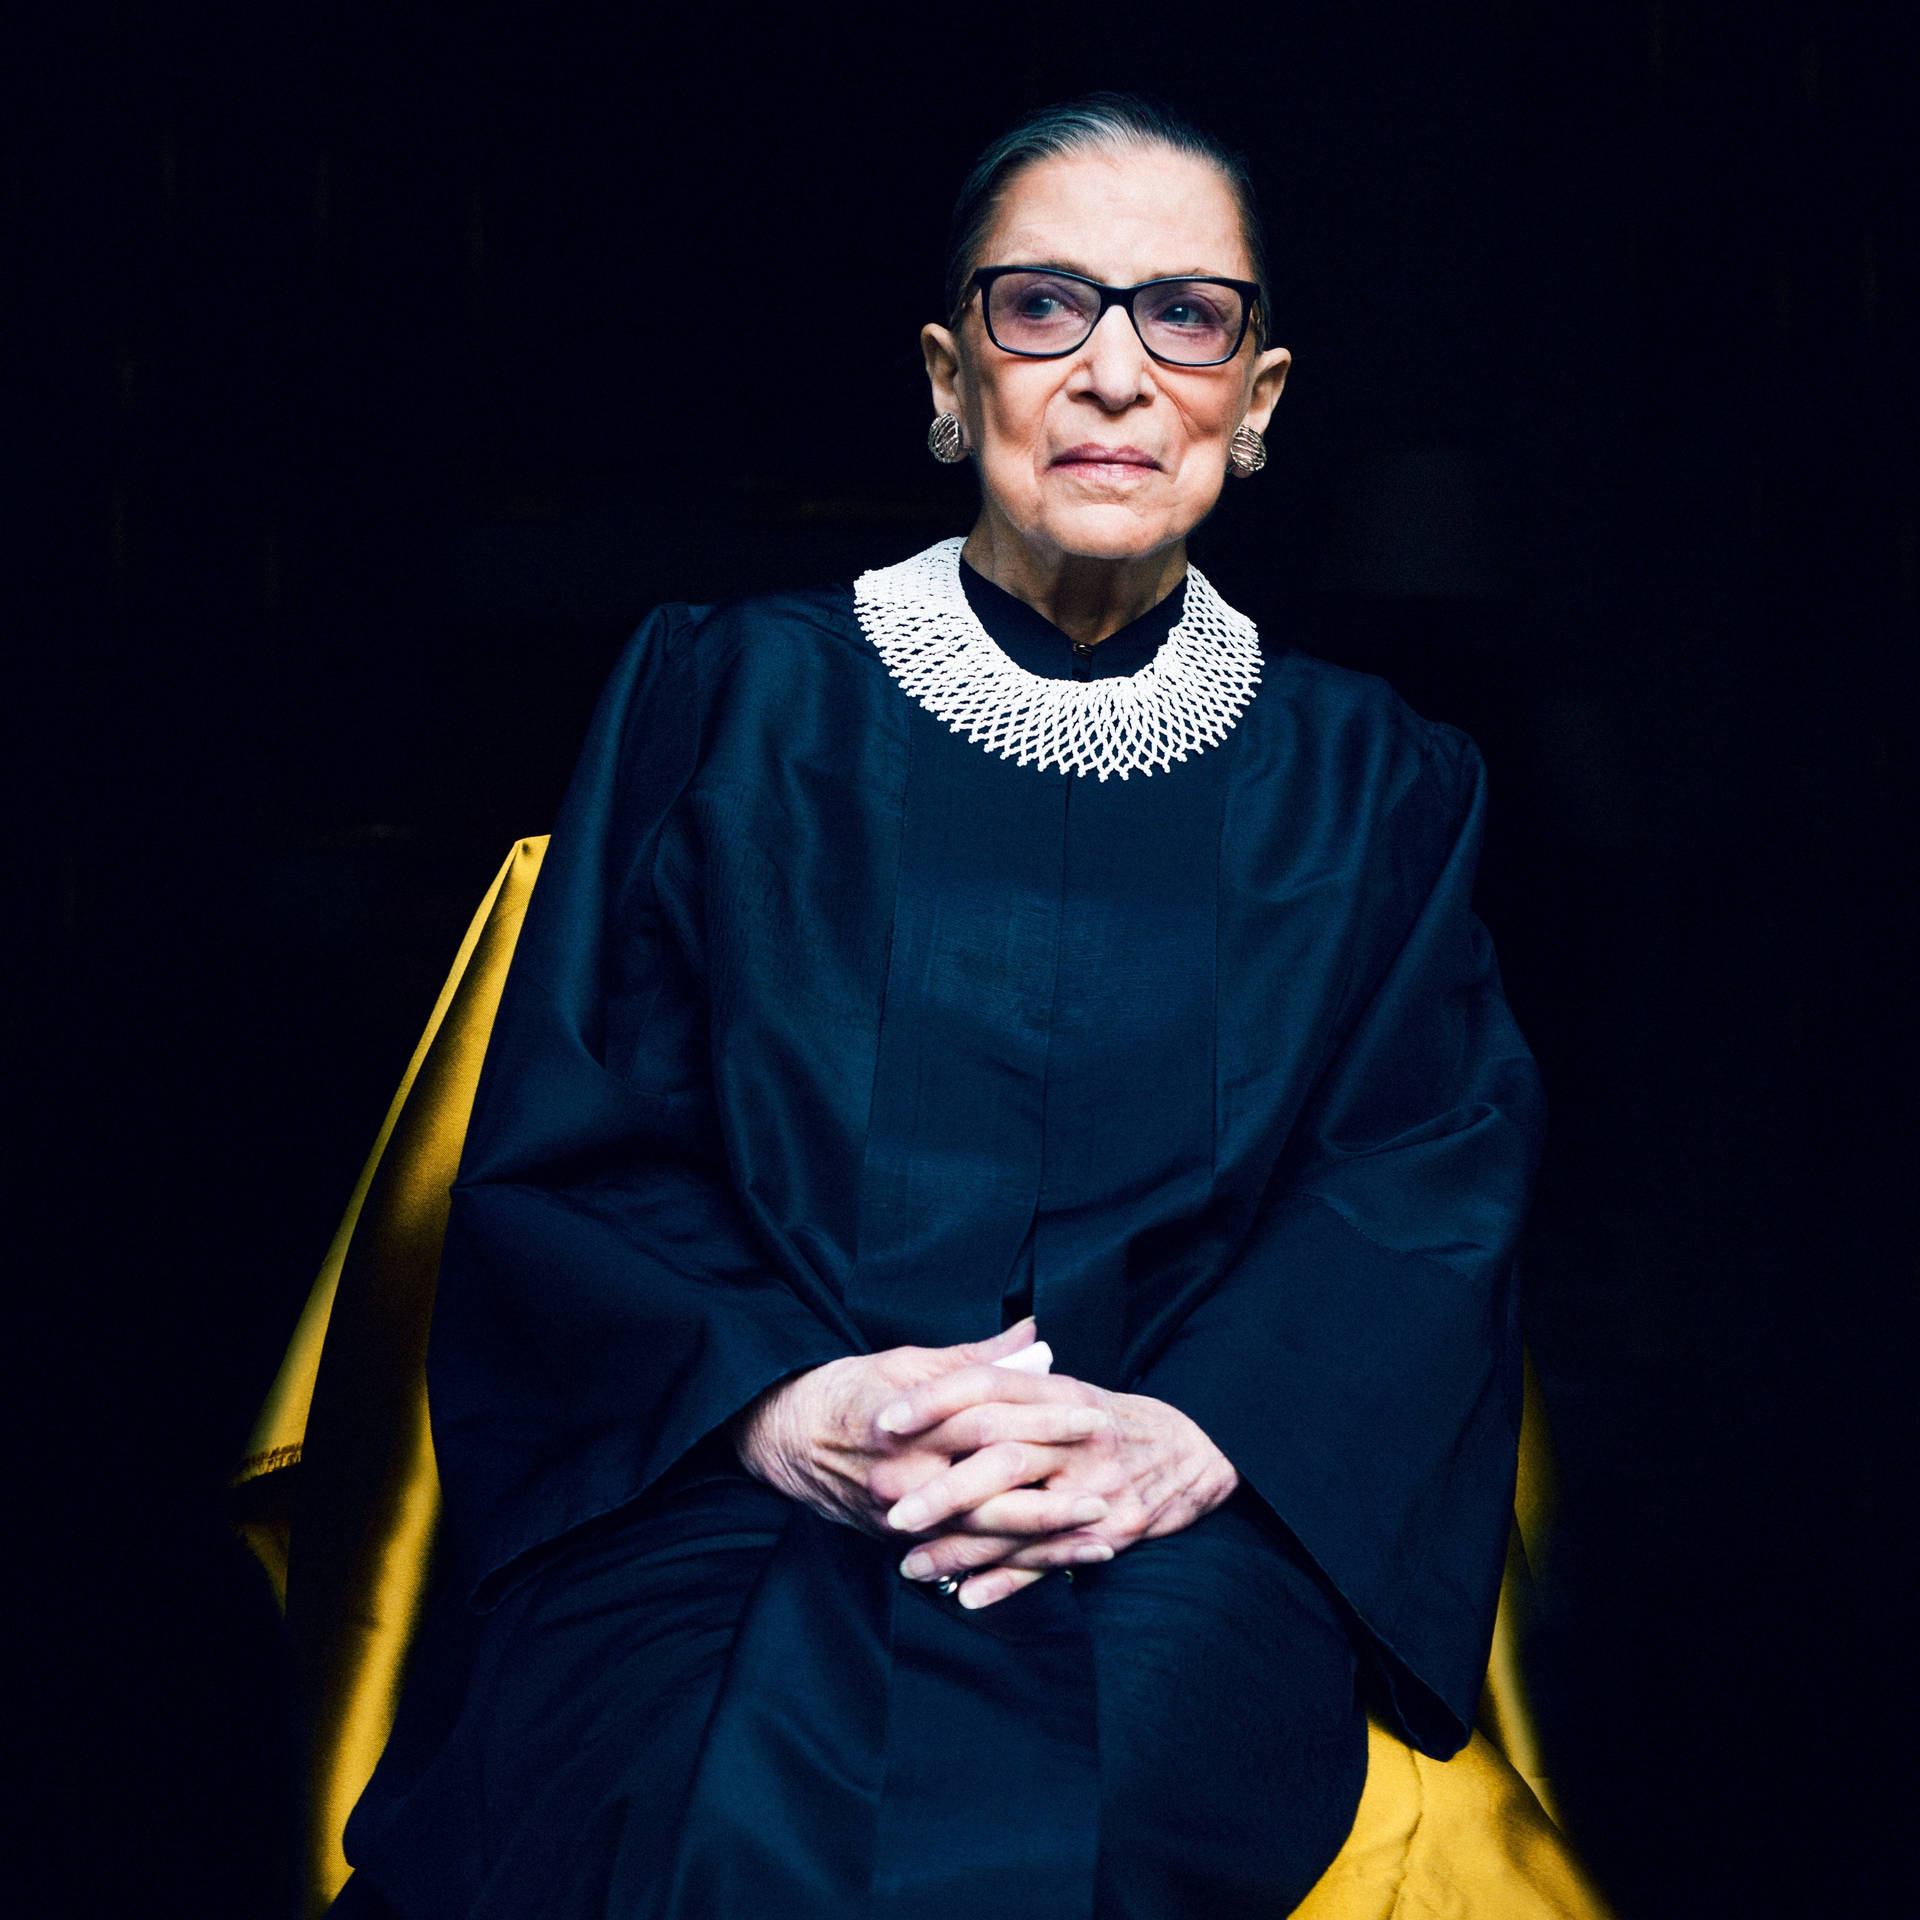 Ruth Bader Ginsburg Monochromatic Black Gown